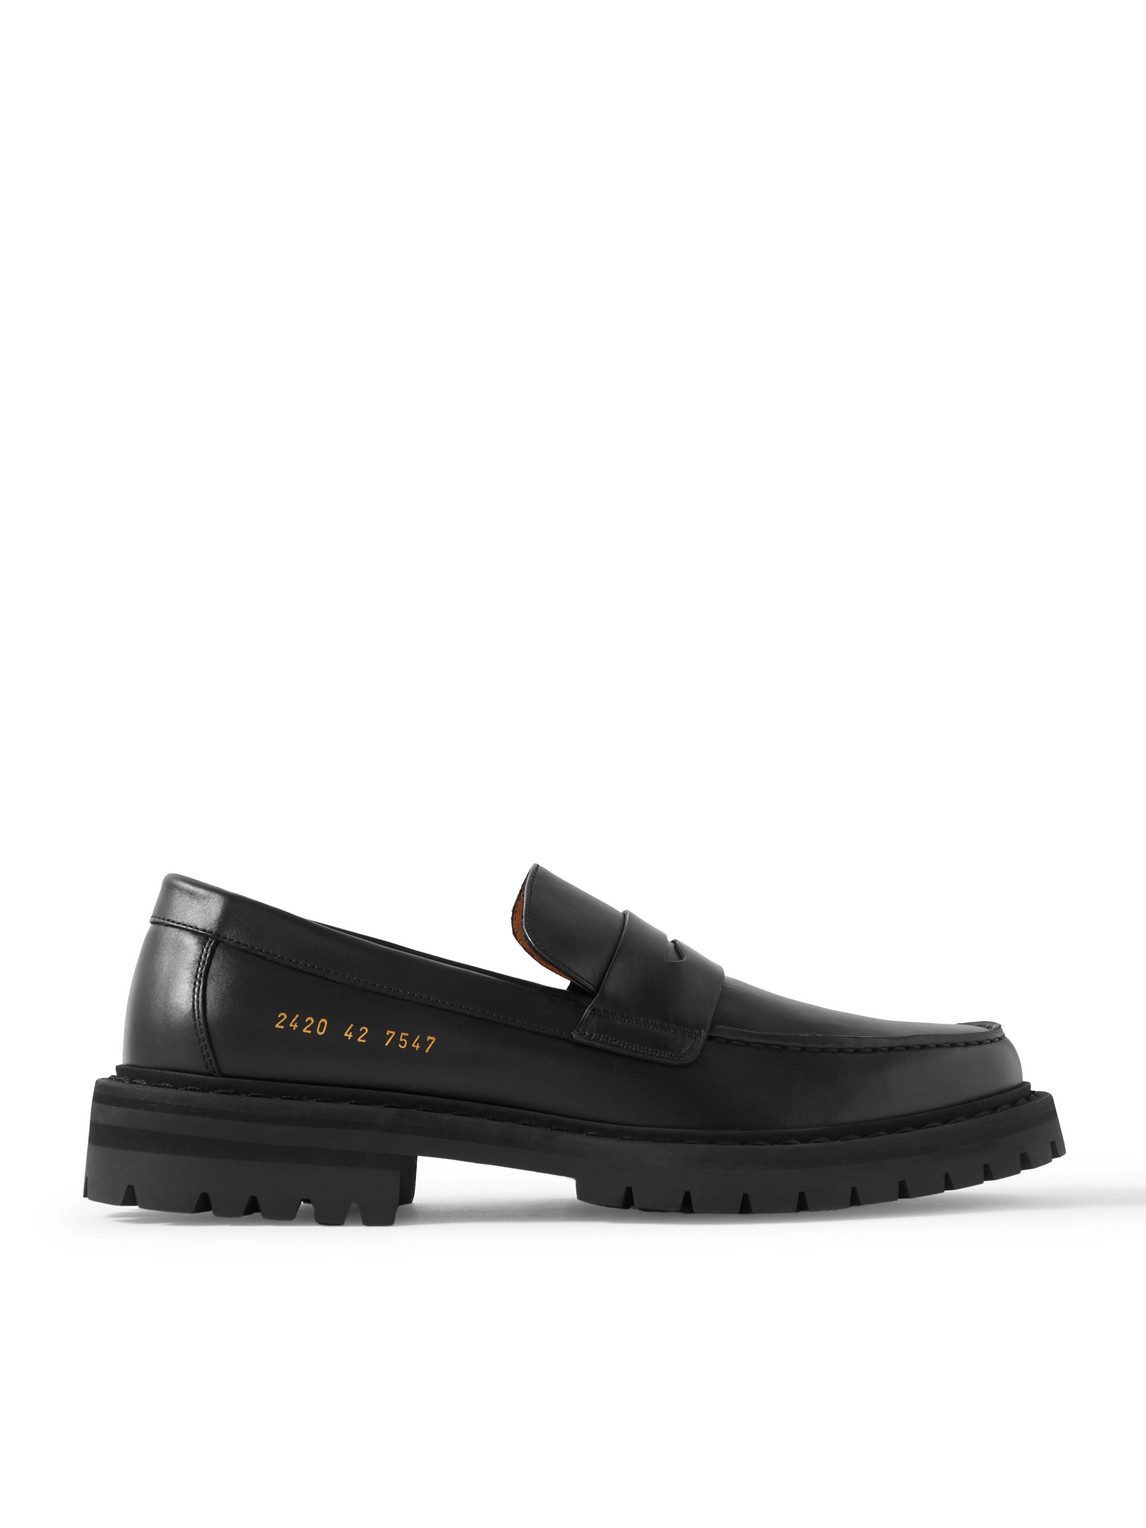 COMMON PROJECTS LEATHER PENNY LOAFERS